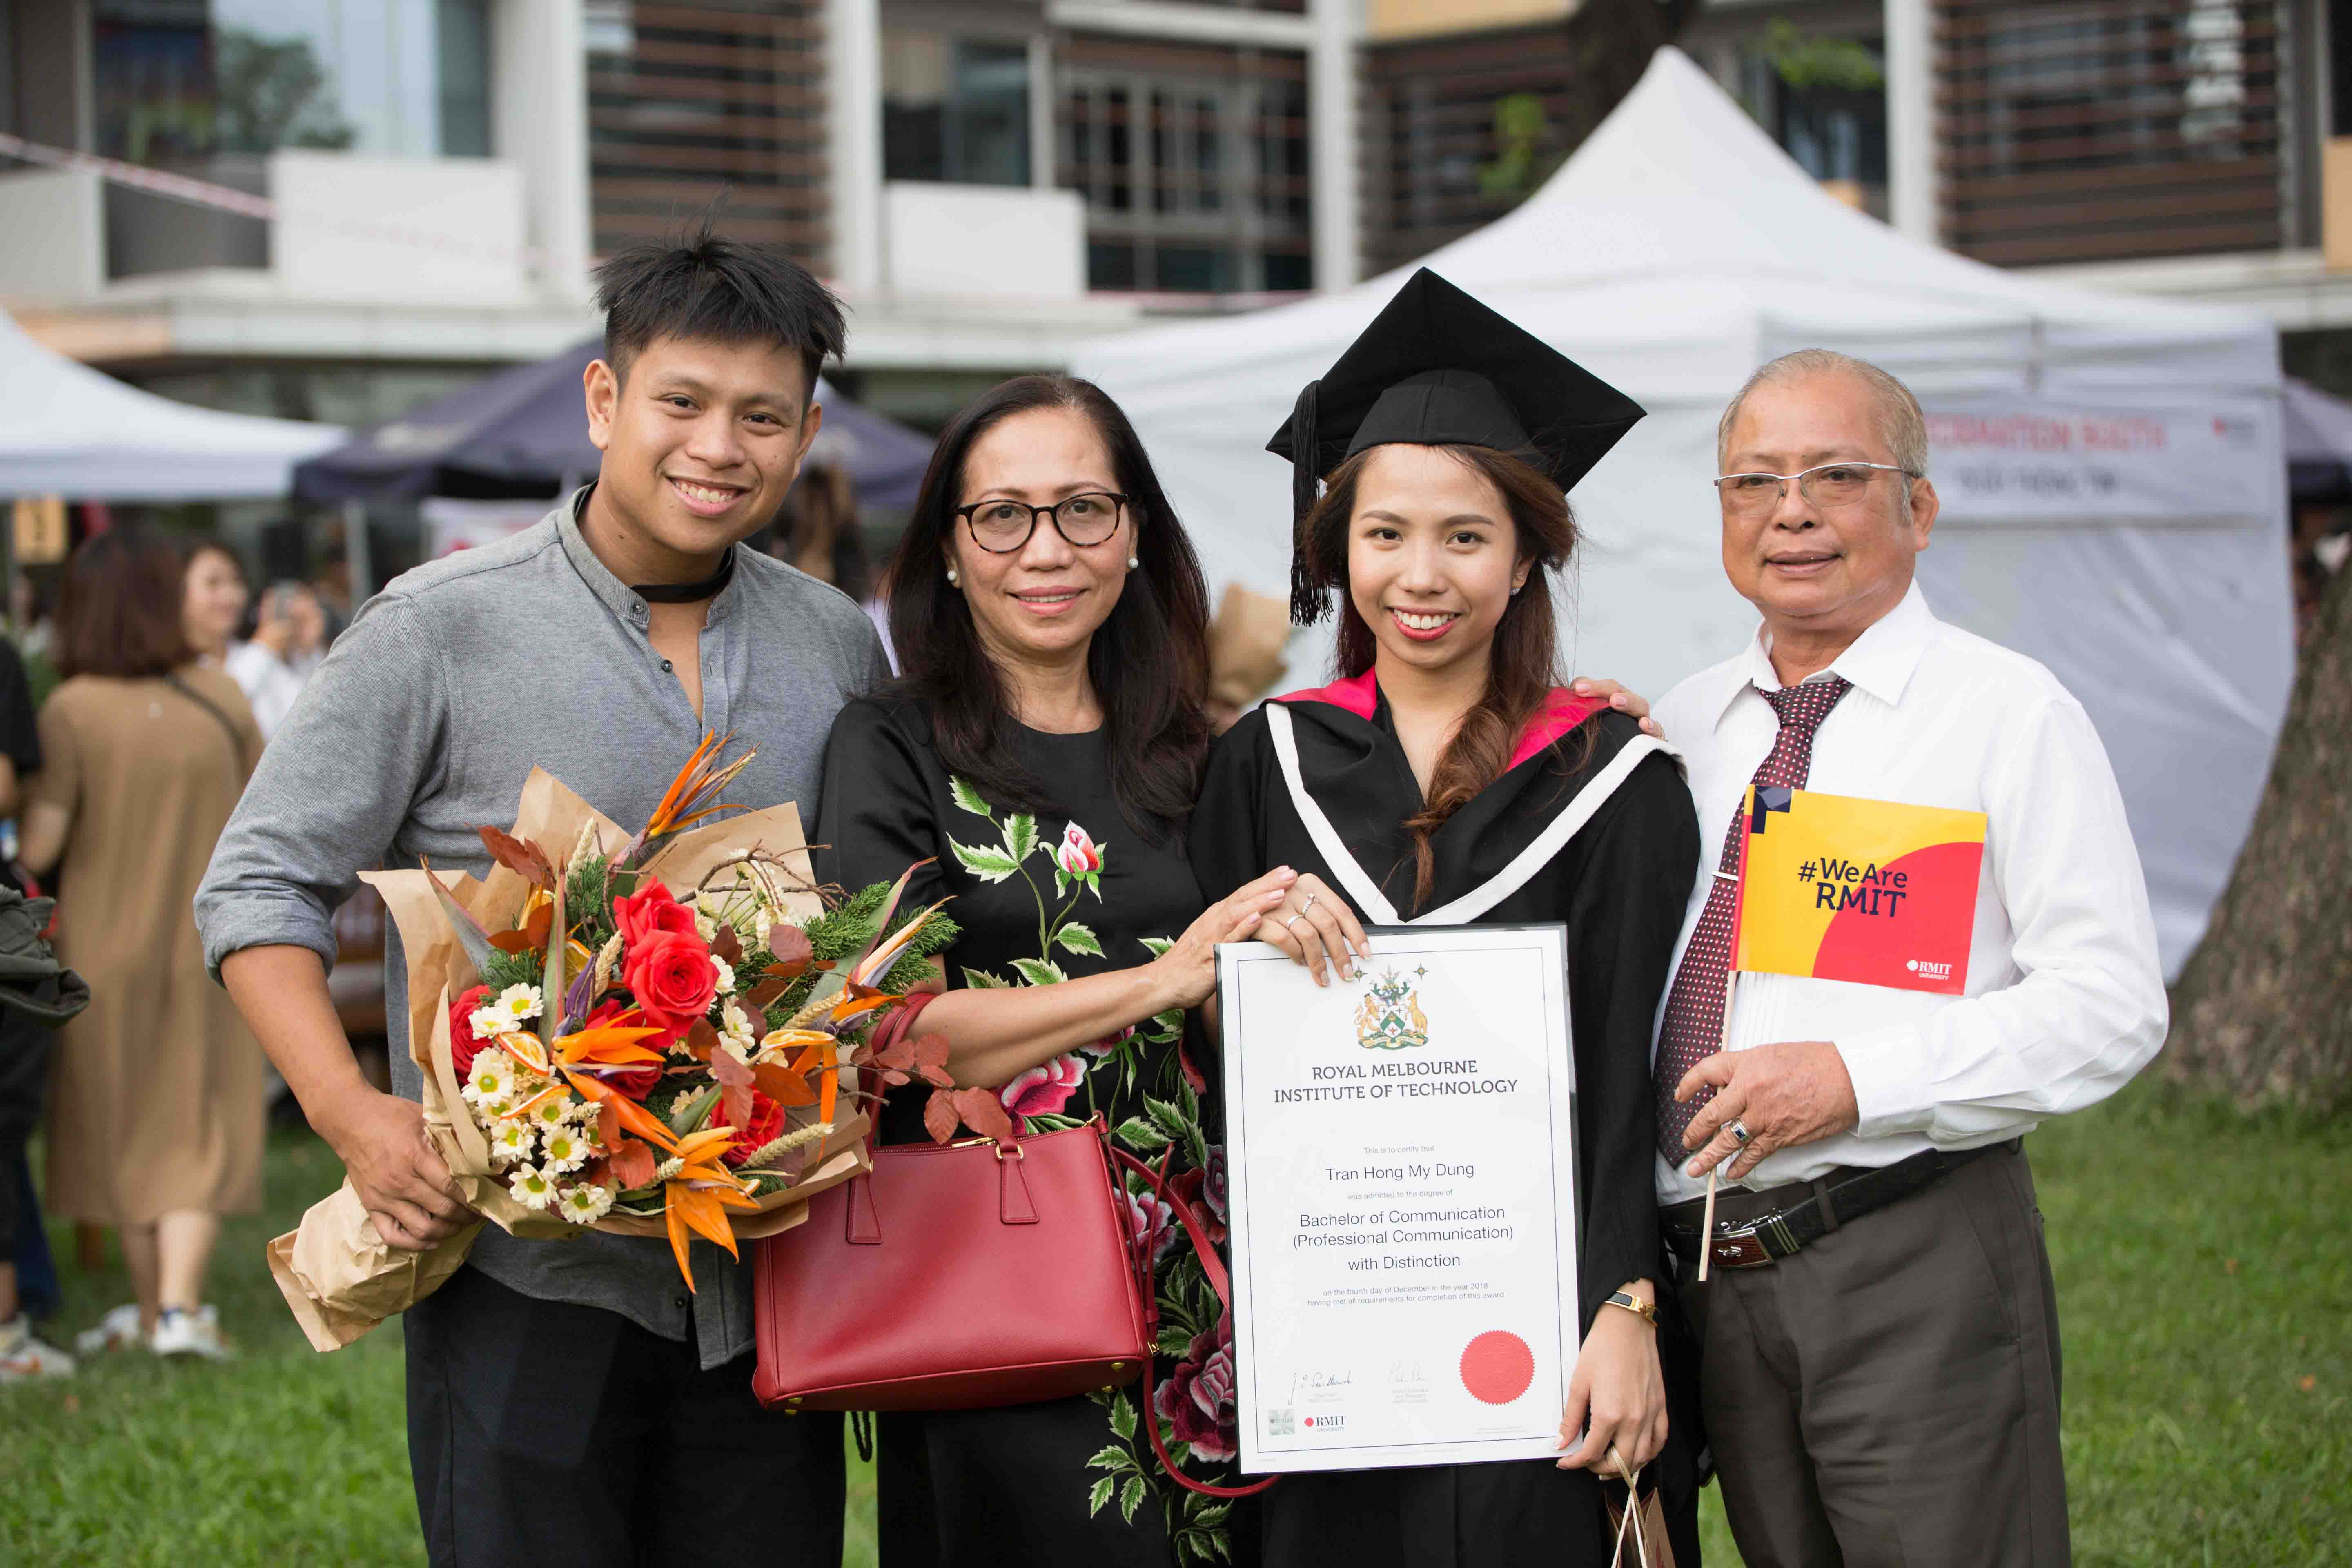 Cindy and her family and friends at her graduation at the end of 2018.